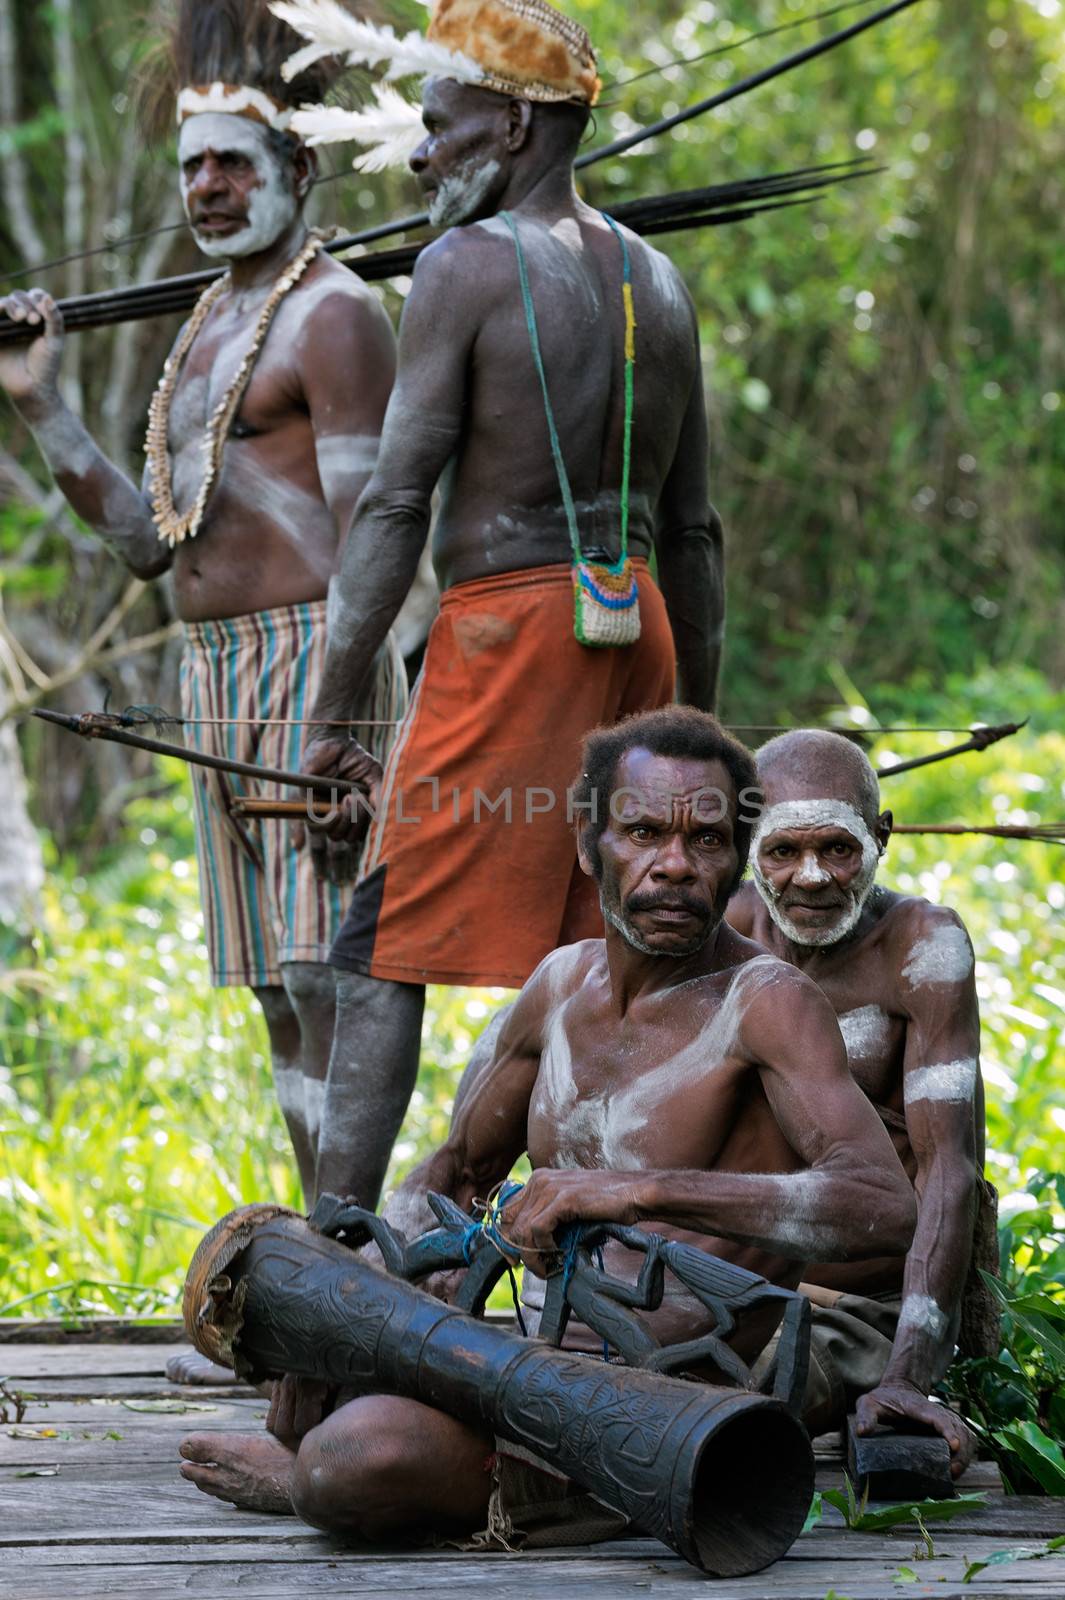  Asmat tribesman with drum. by SURZ